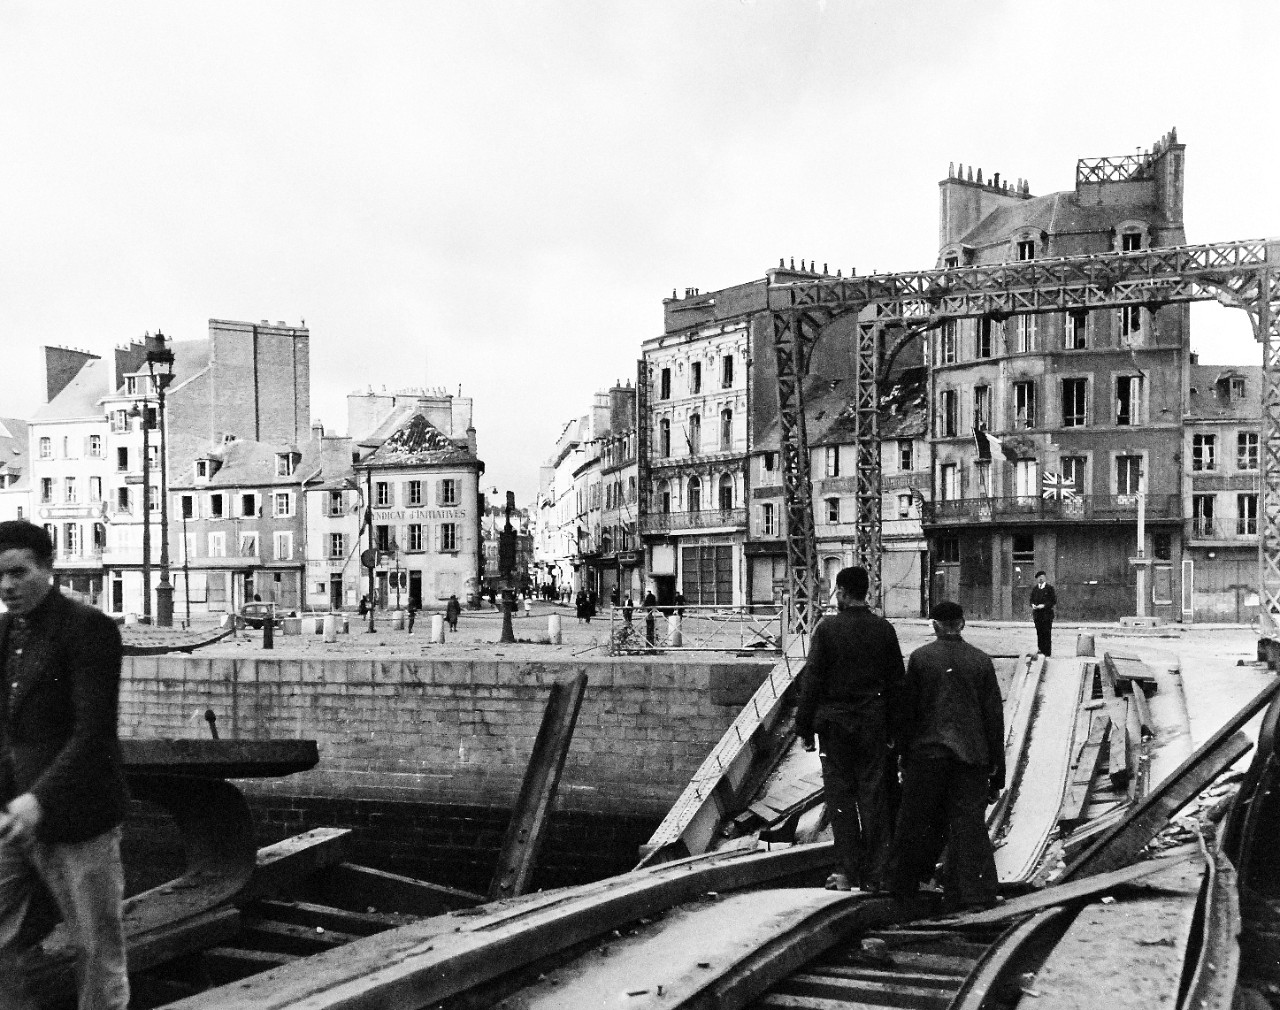 80-G-255916:  Normandy Invasion, Cherbourg, France, July 1944.    French civilians pass over damaged bridge to return to their homes in Cherbourg, France, after its liberation by Allies. Note the French and British flags flying from building at the right.   Photograph received October 28, 1944.   Official U.S. Navy Photograph, now in the collections of the National Archives.   (2014/11/05). 